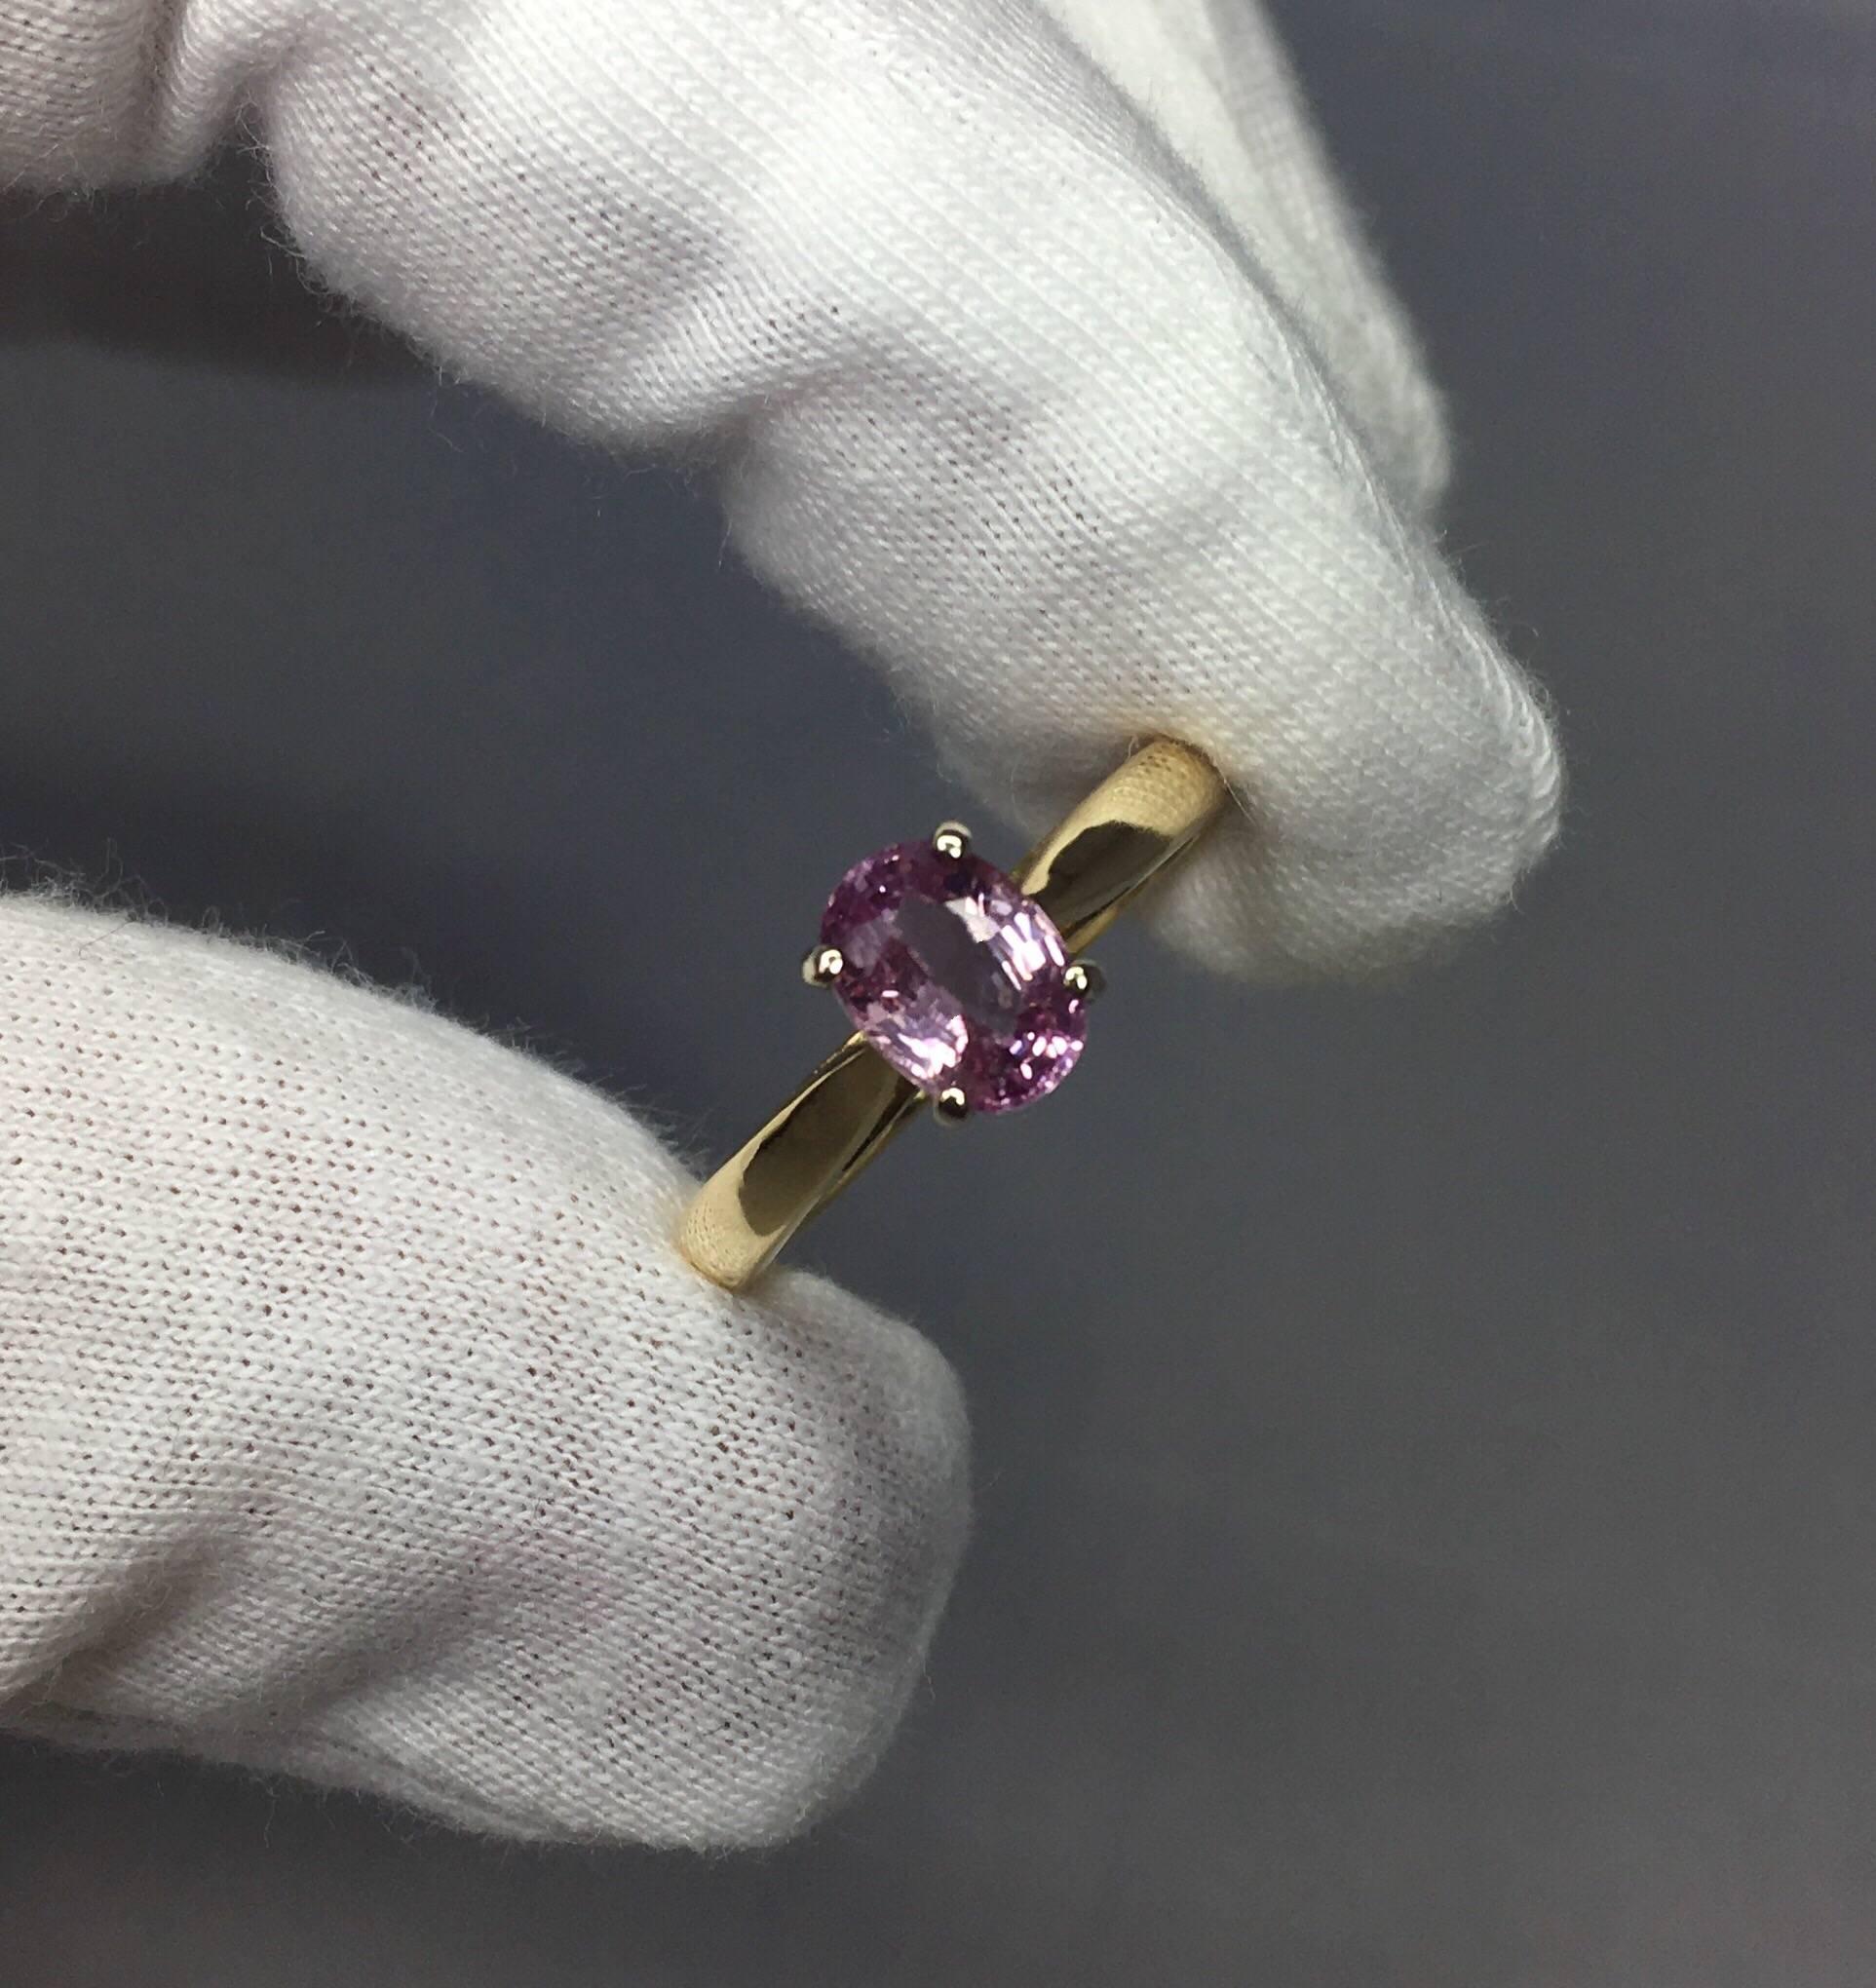 Stunning purplish pink sapphire set in a fine 18k multi-tone gold setting.
White gold head and yellow gold shank which suits this stone well.

1.37 carat sapphire with stunning vivid pink purple colour and very good clarity.

Totally untreated and